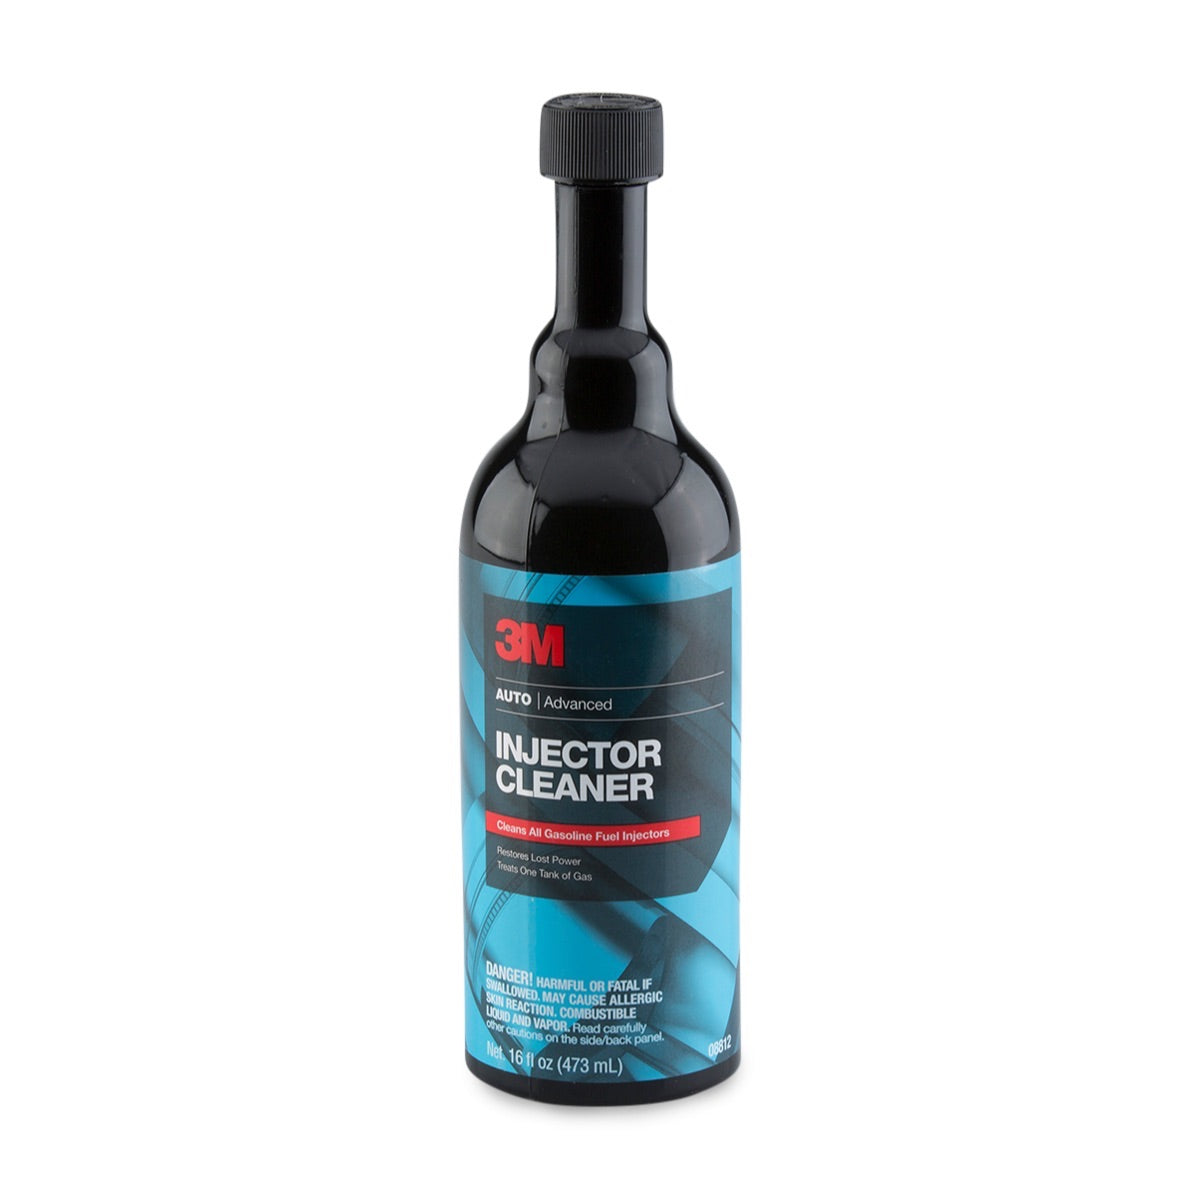 3M Injector Cleaner